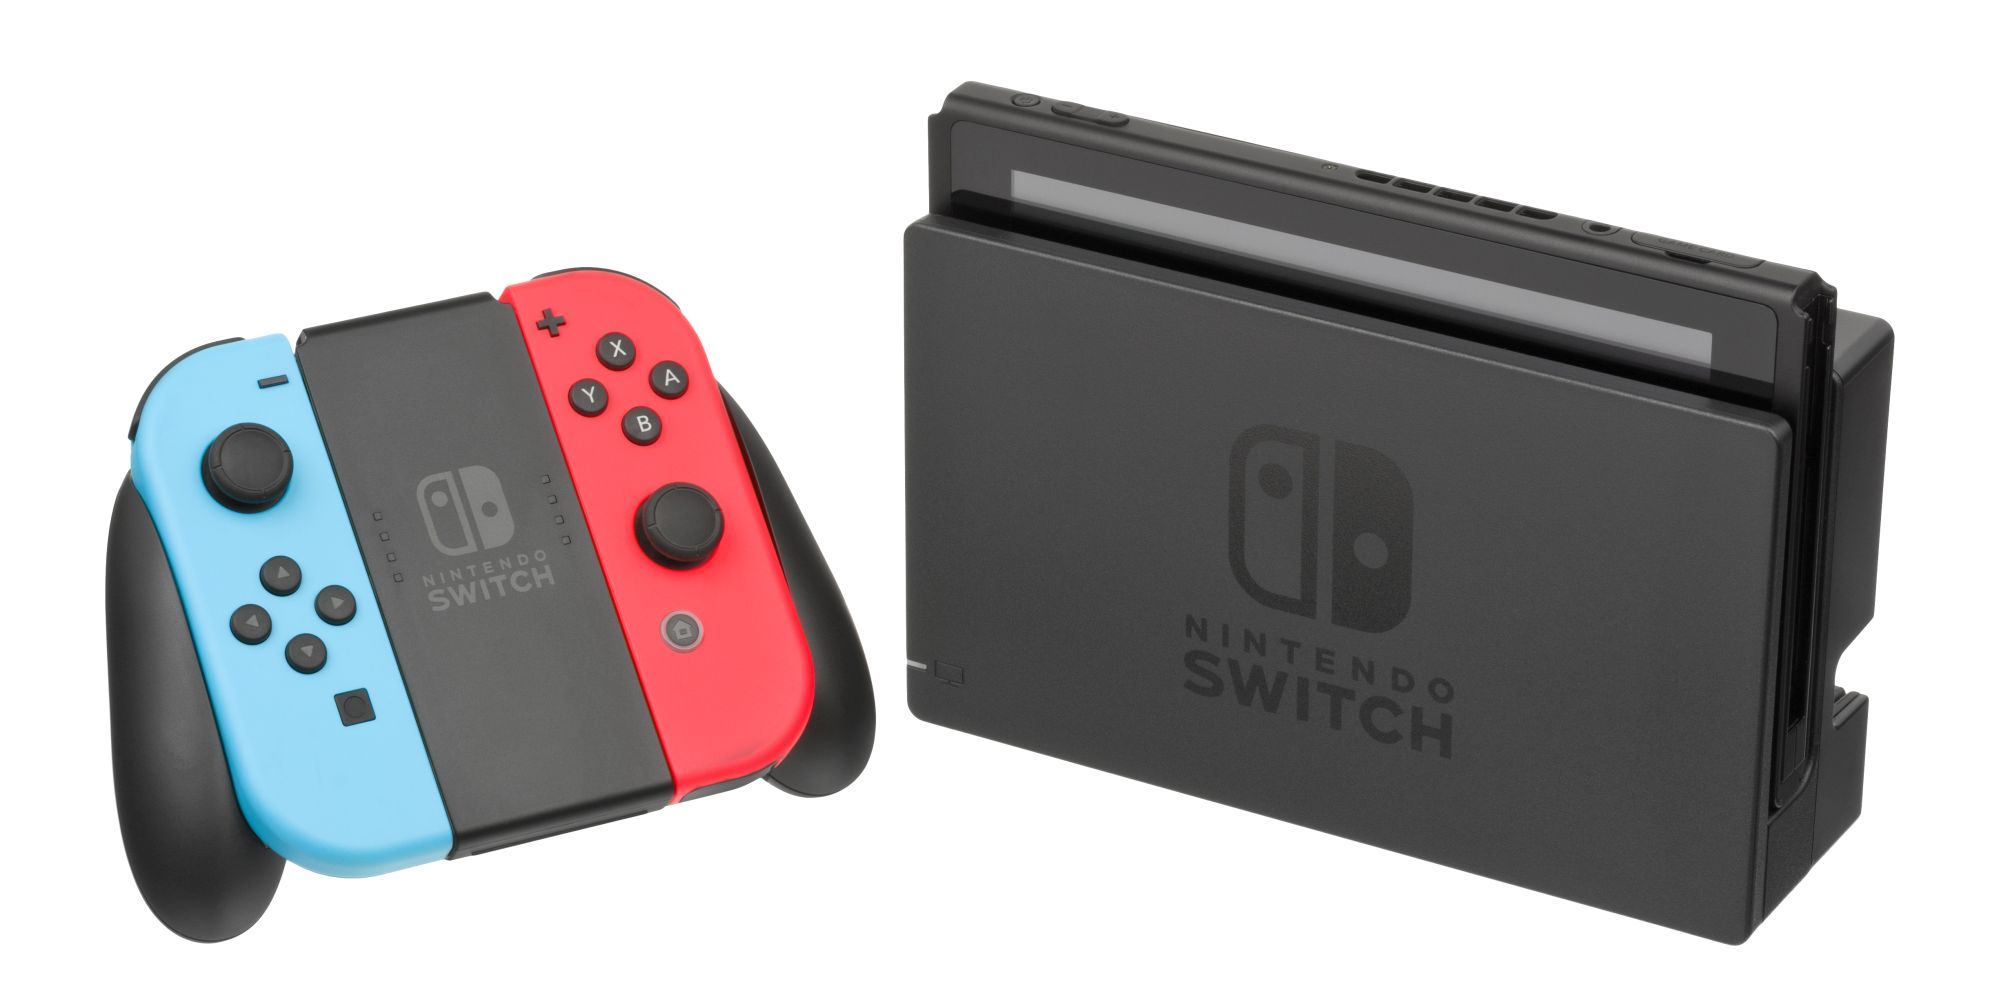 A docked Nintendo Switch with the Joycons in the controller dock